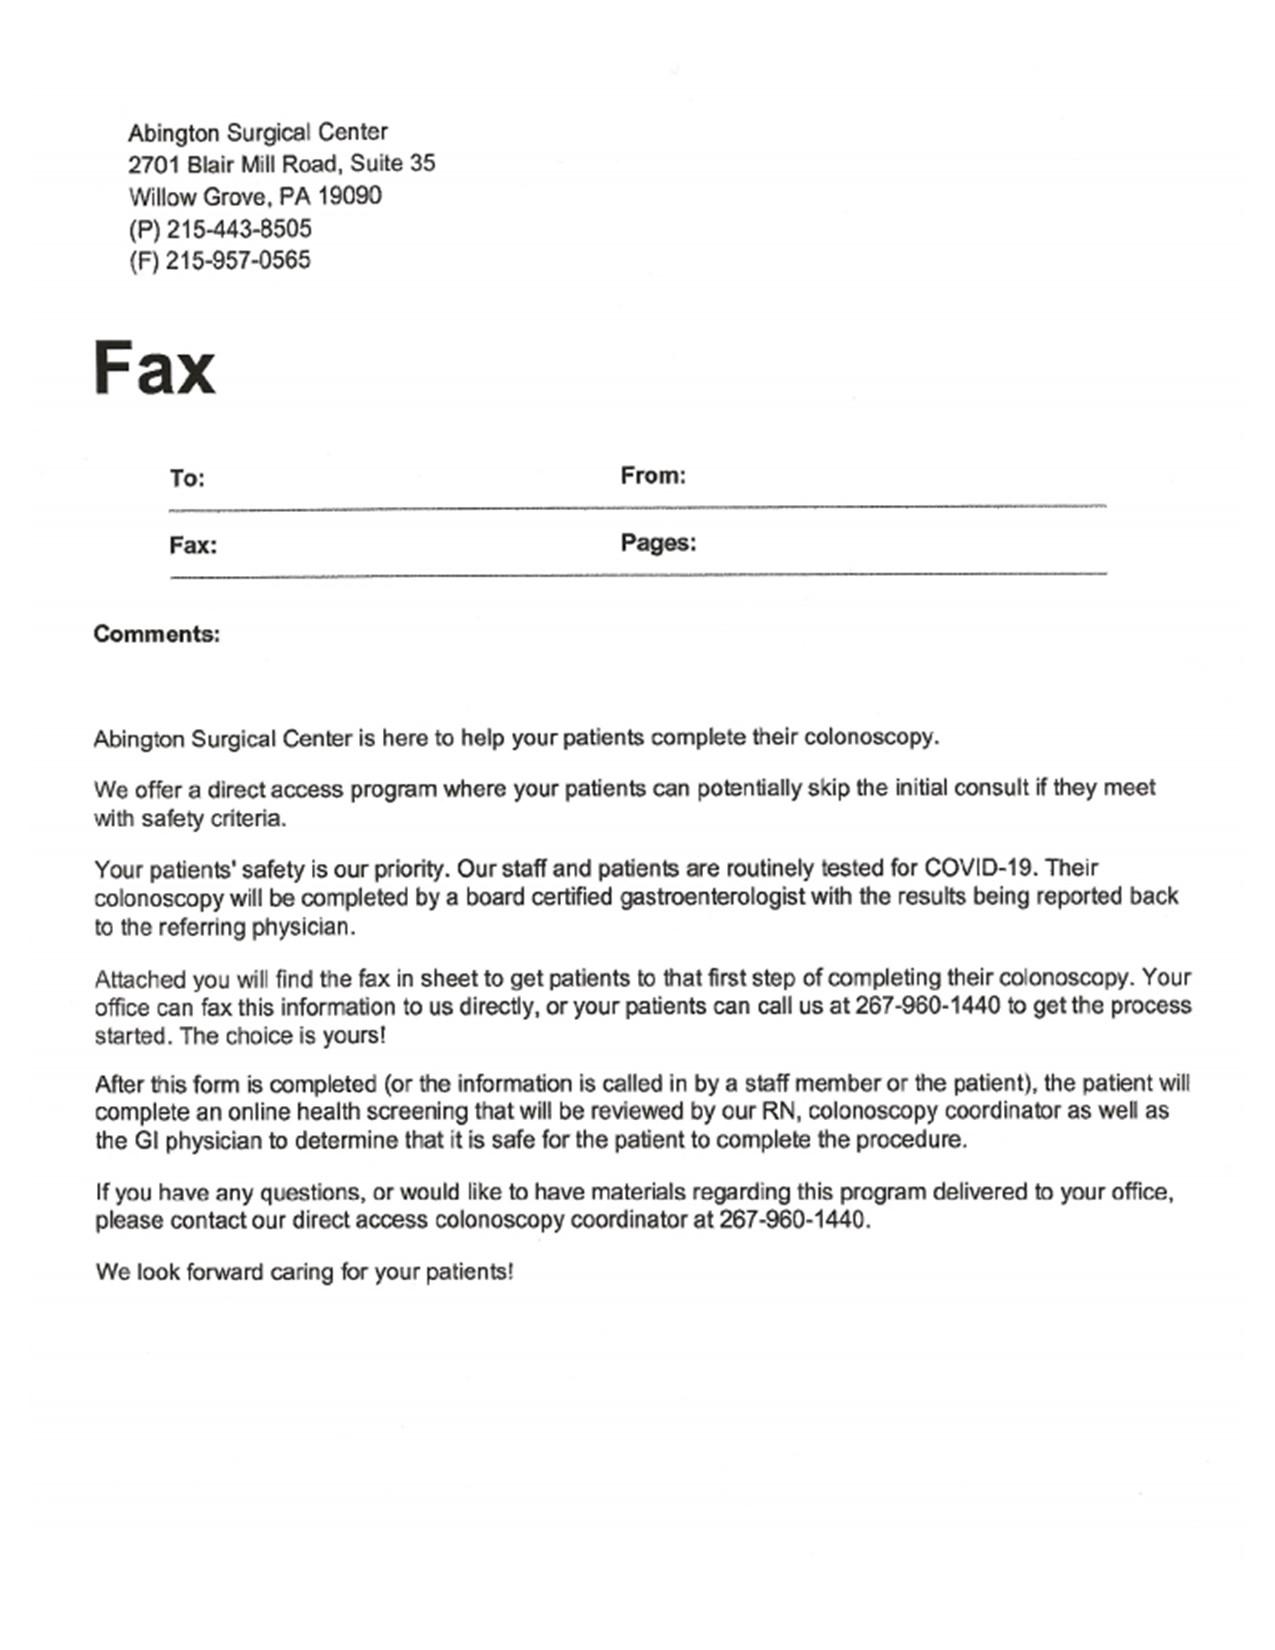 dac-fax-broadcast-cover-sheet